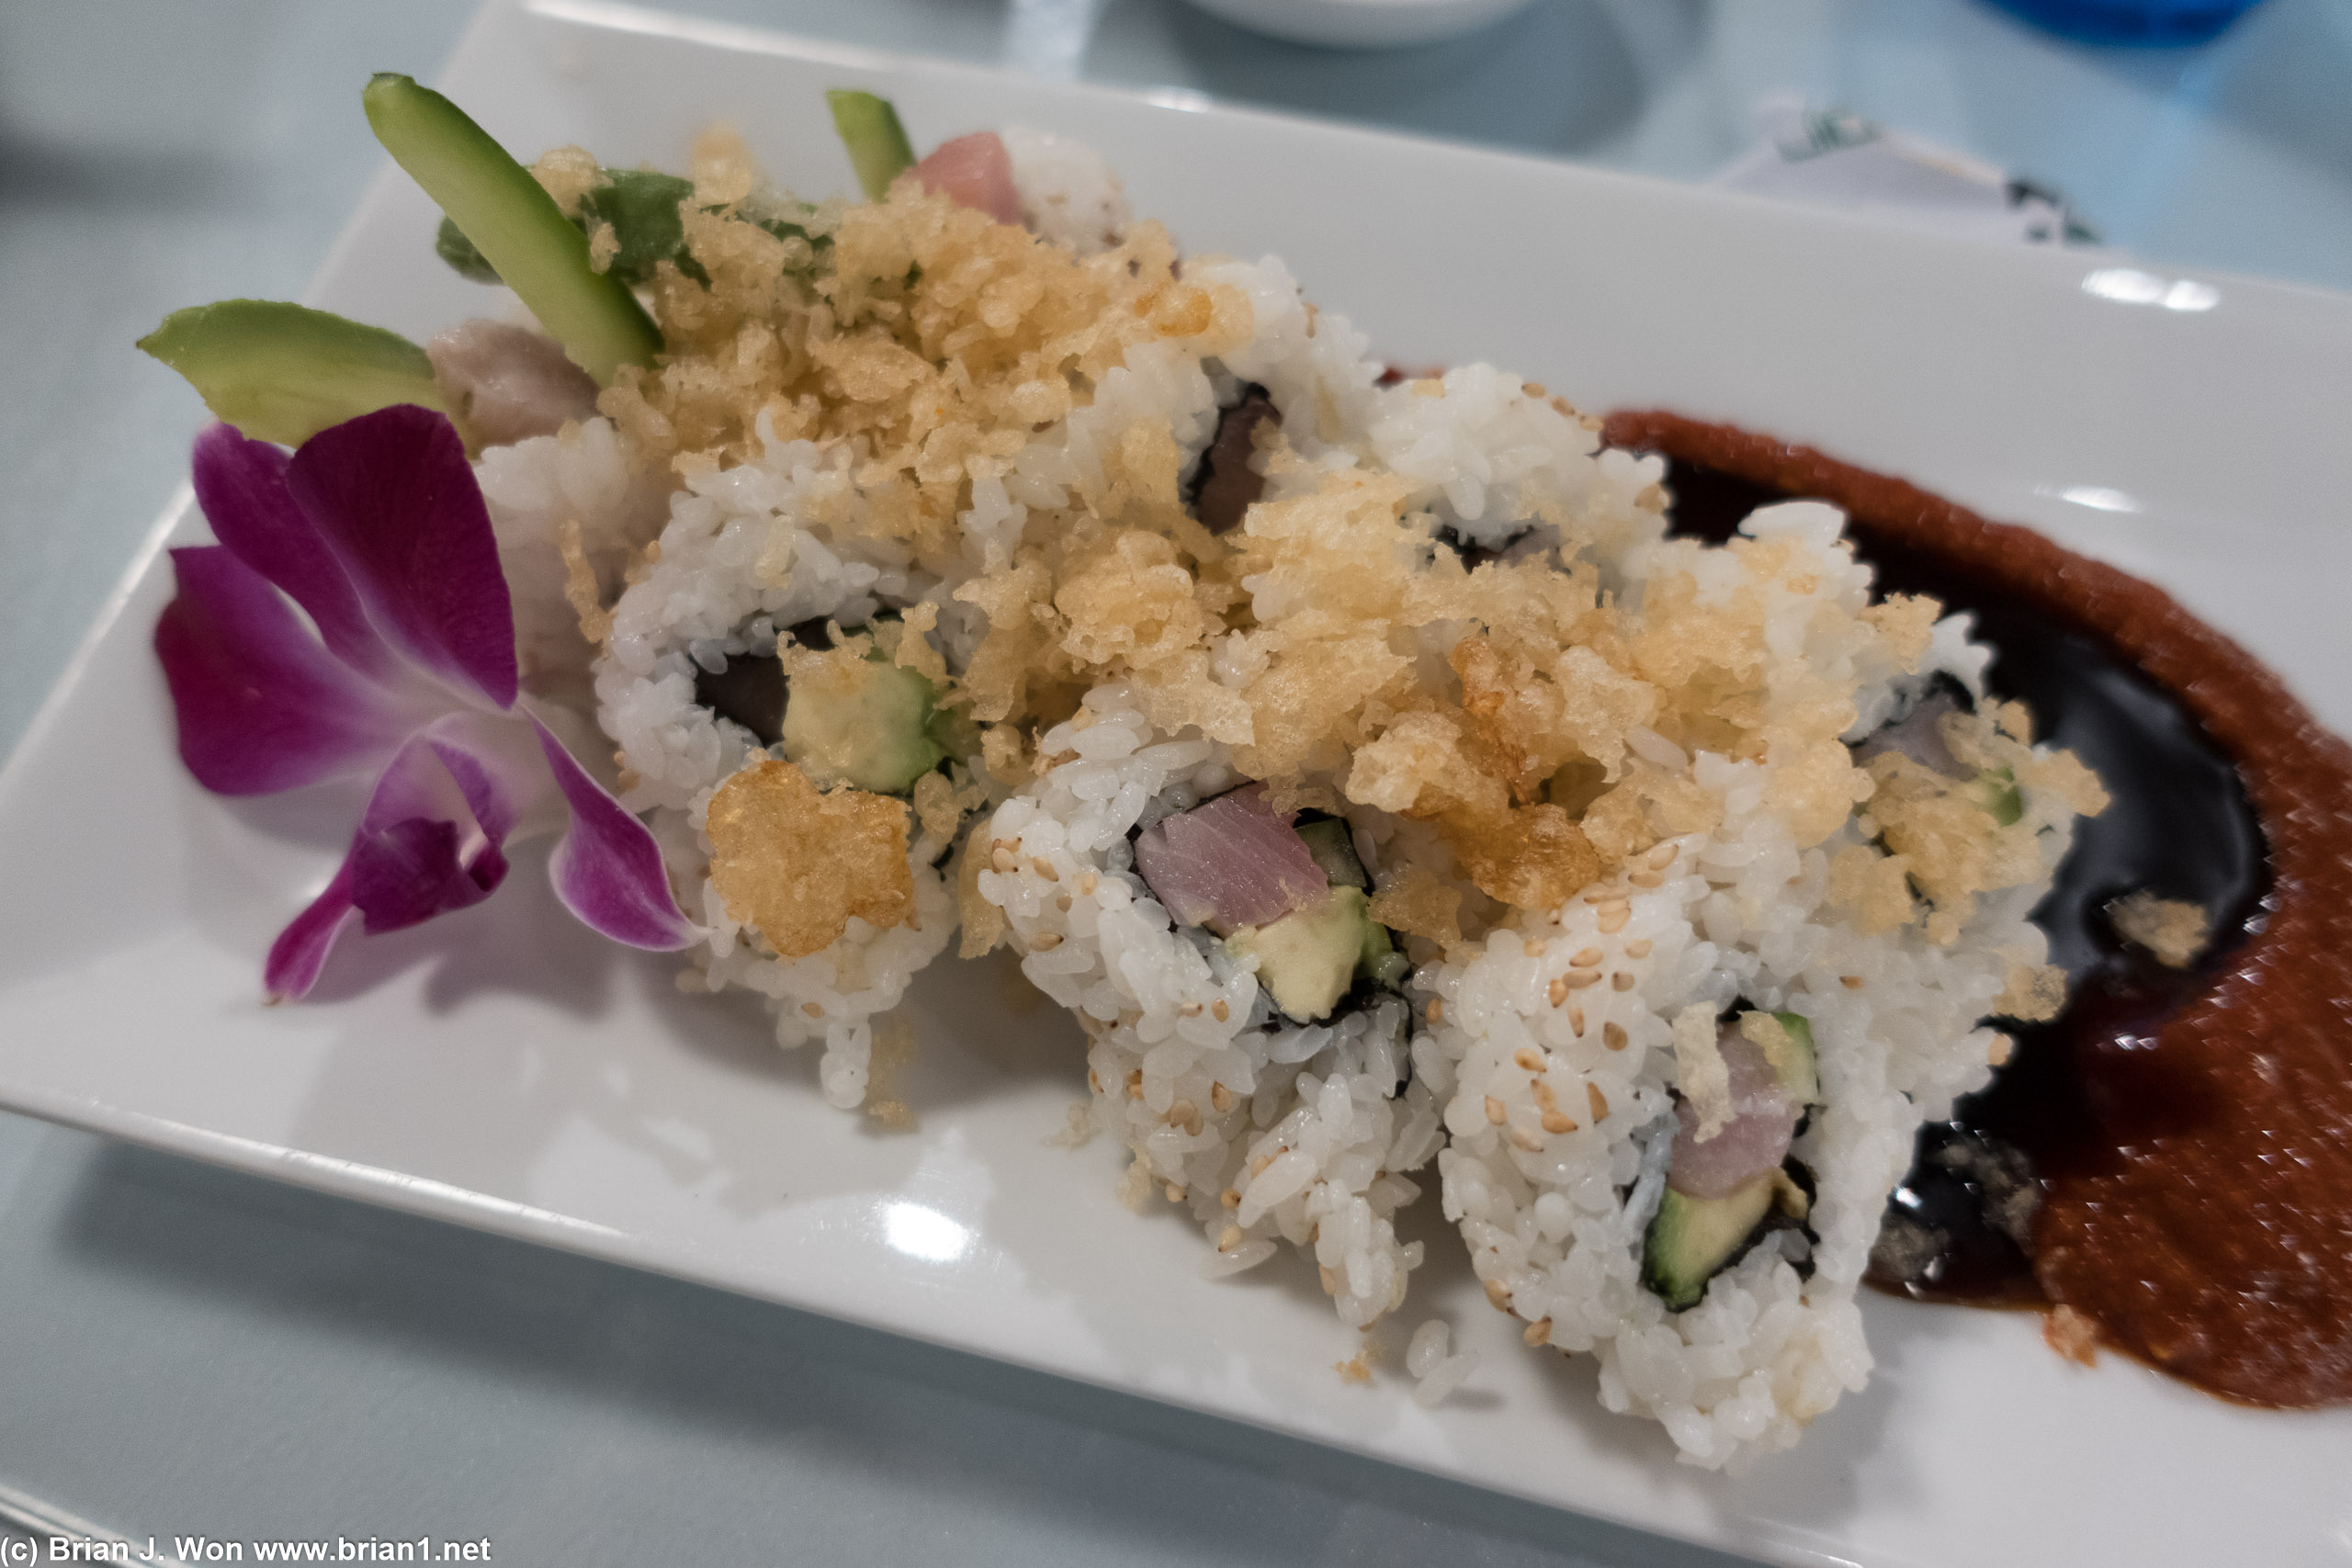 Yellowtail roll was forgettable.